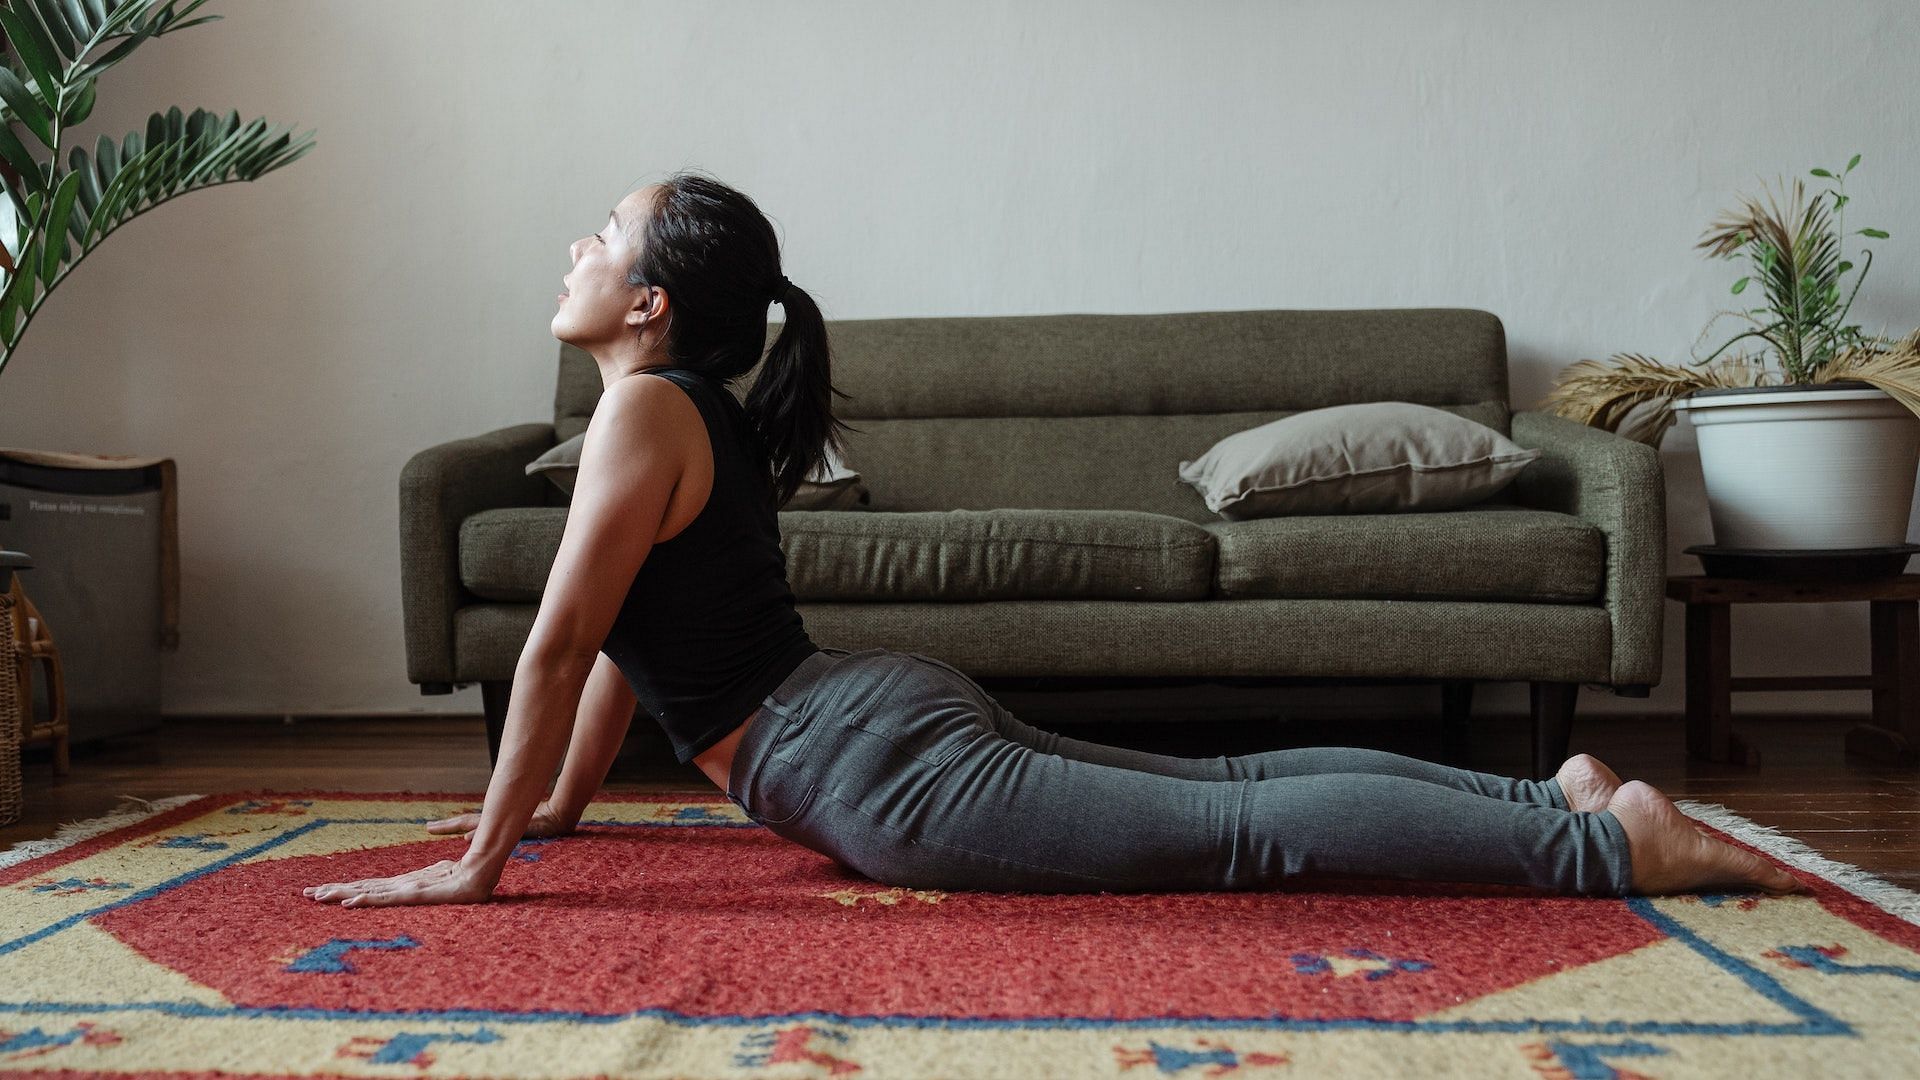 Yoga stretches are a great way to wake up your muscles. (Photo via Pexels/Ketut Subiyanto)